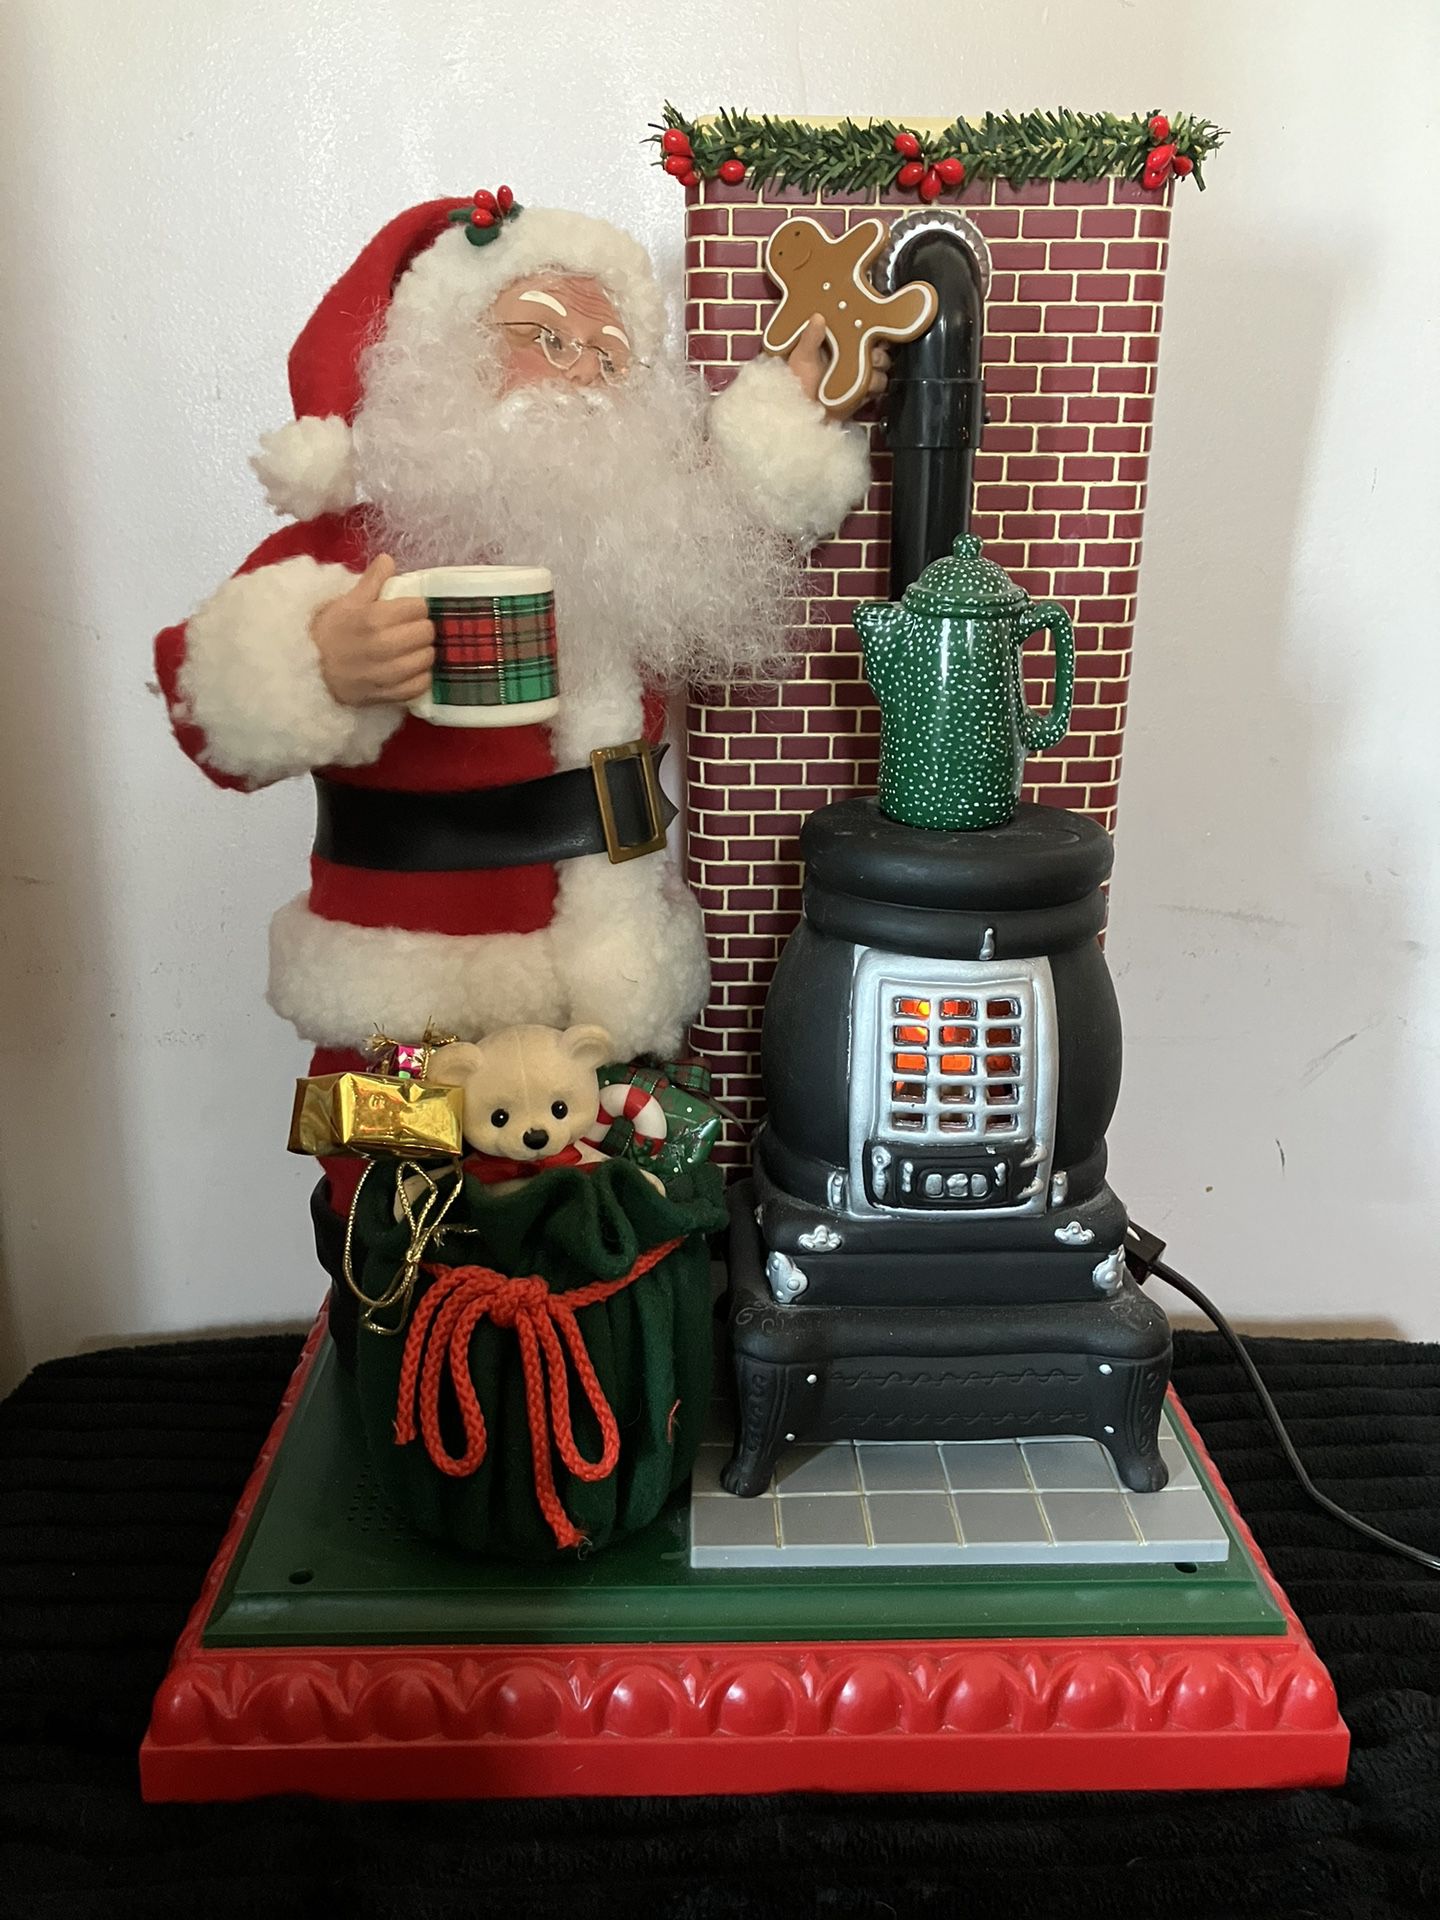 Vintage Animated Holiday Scene Santa With Pot Belly Stove Tested Works And Sounds Great